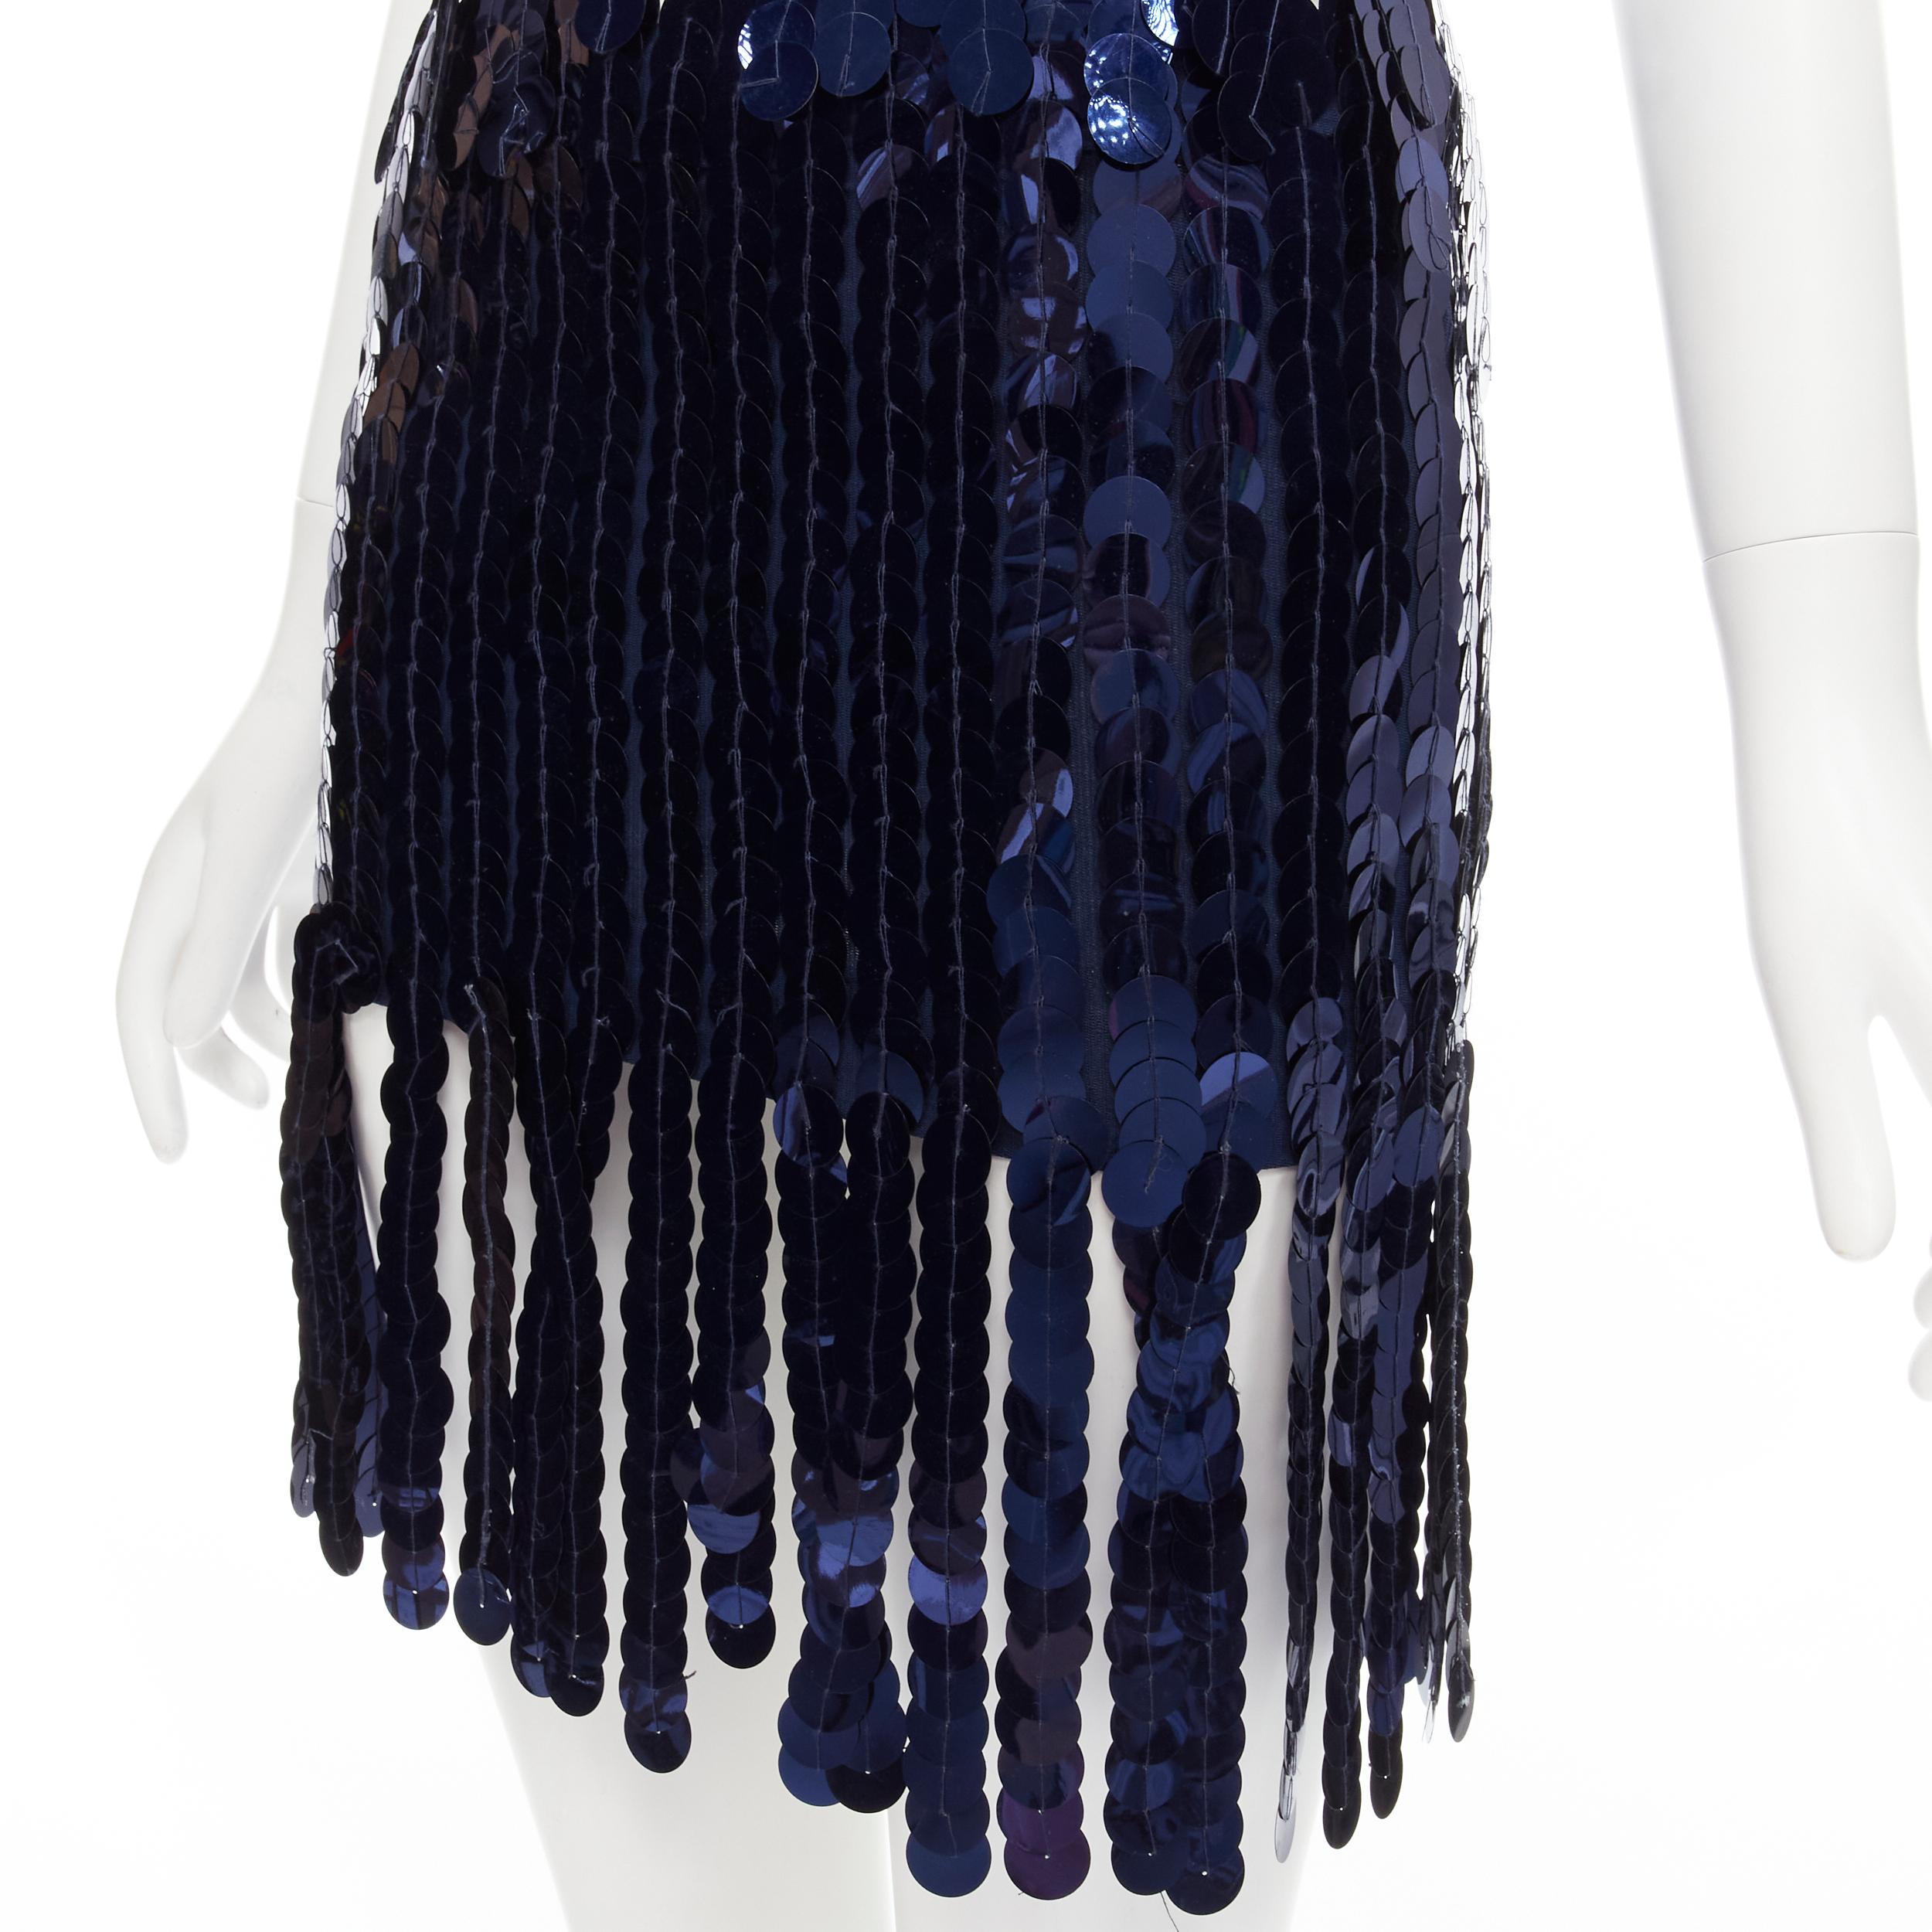 ANGELO TARLAZZI Vintage blue paillette sequins fringe tube skirt set FR36 S 
Reference: GIYG/A00153 
Brand: Angelo Tarlazzi 
Material: Nylon 
Color: Blue 
Pattern: Solid 
Extra Detail: Mirrored pailette sequins. Stretch fit. 
Made in: France